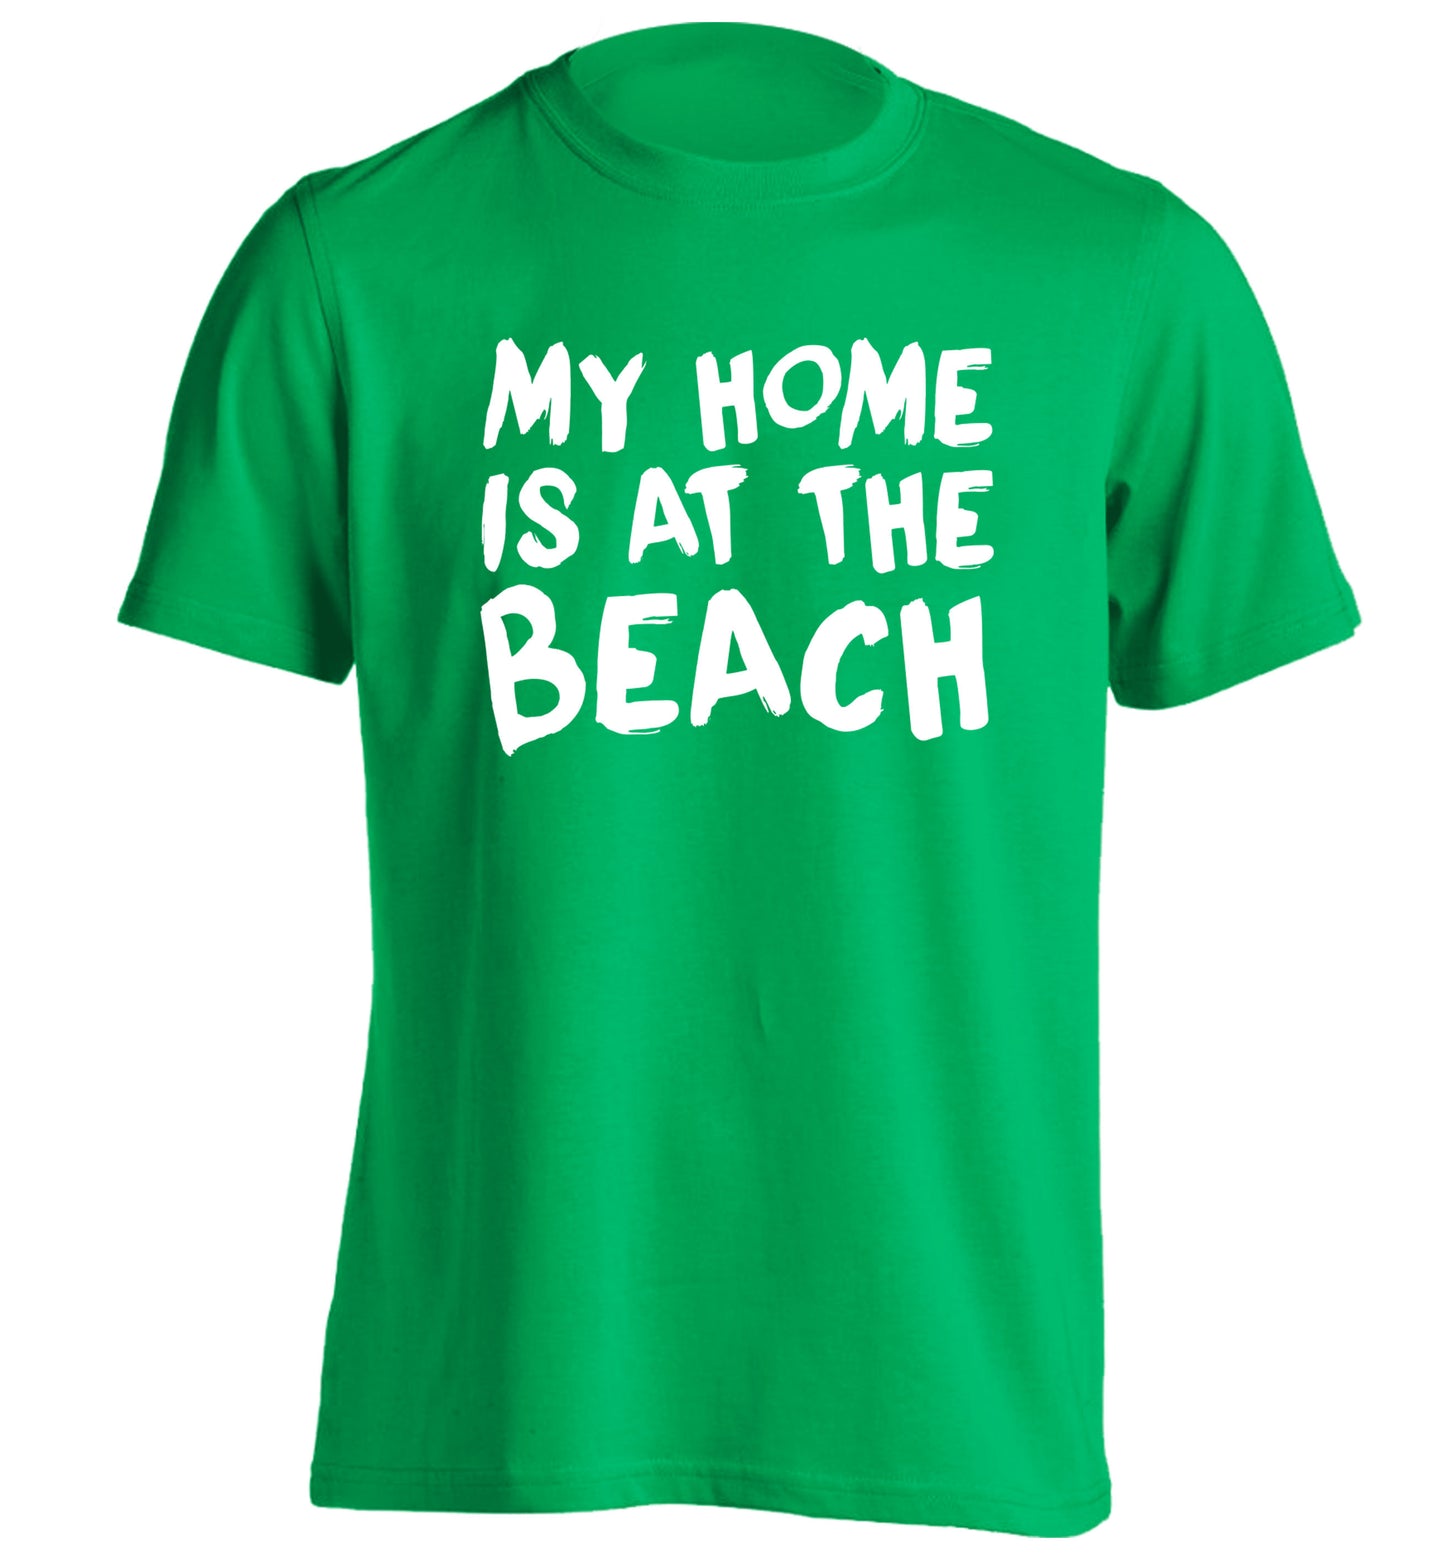 My home is at the beach adults unisex green Tshirt 2XL